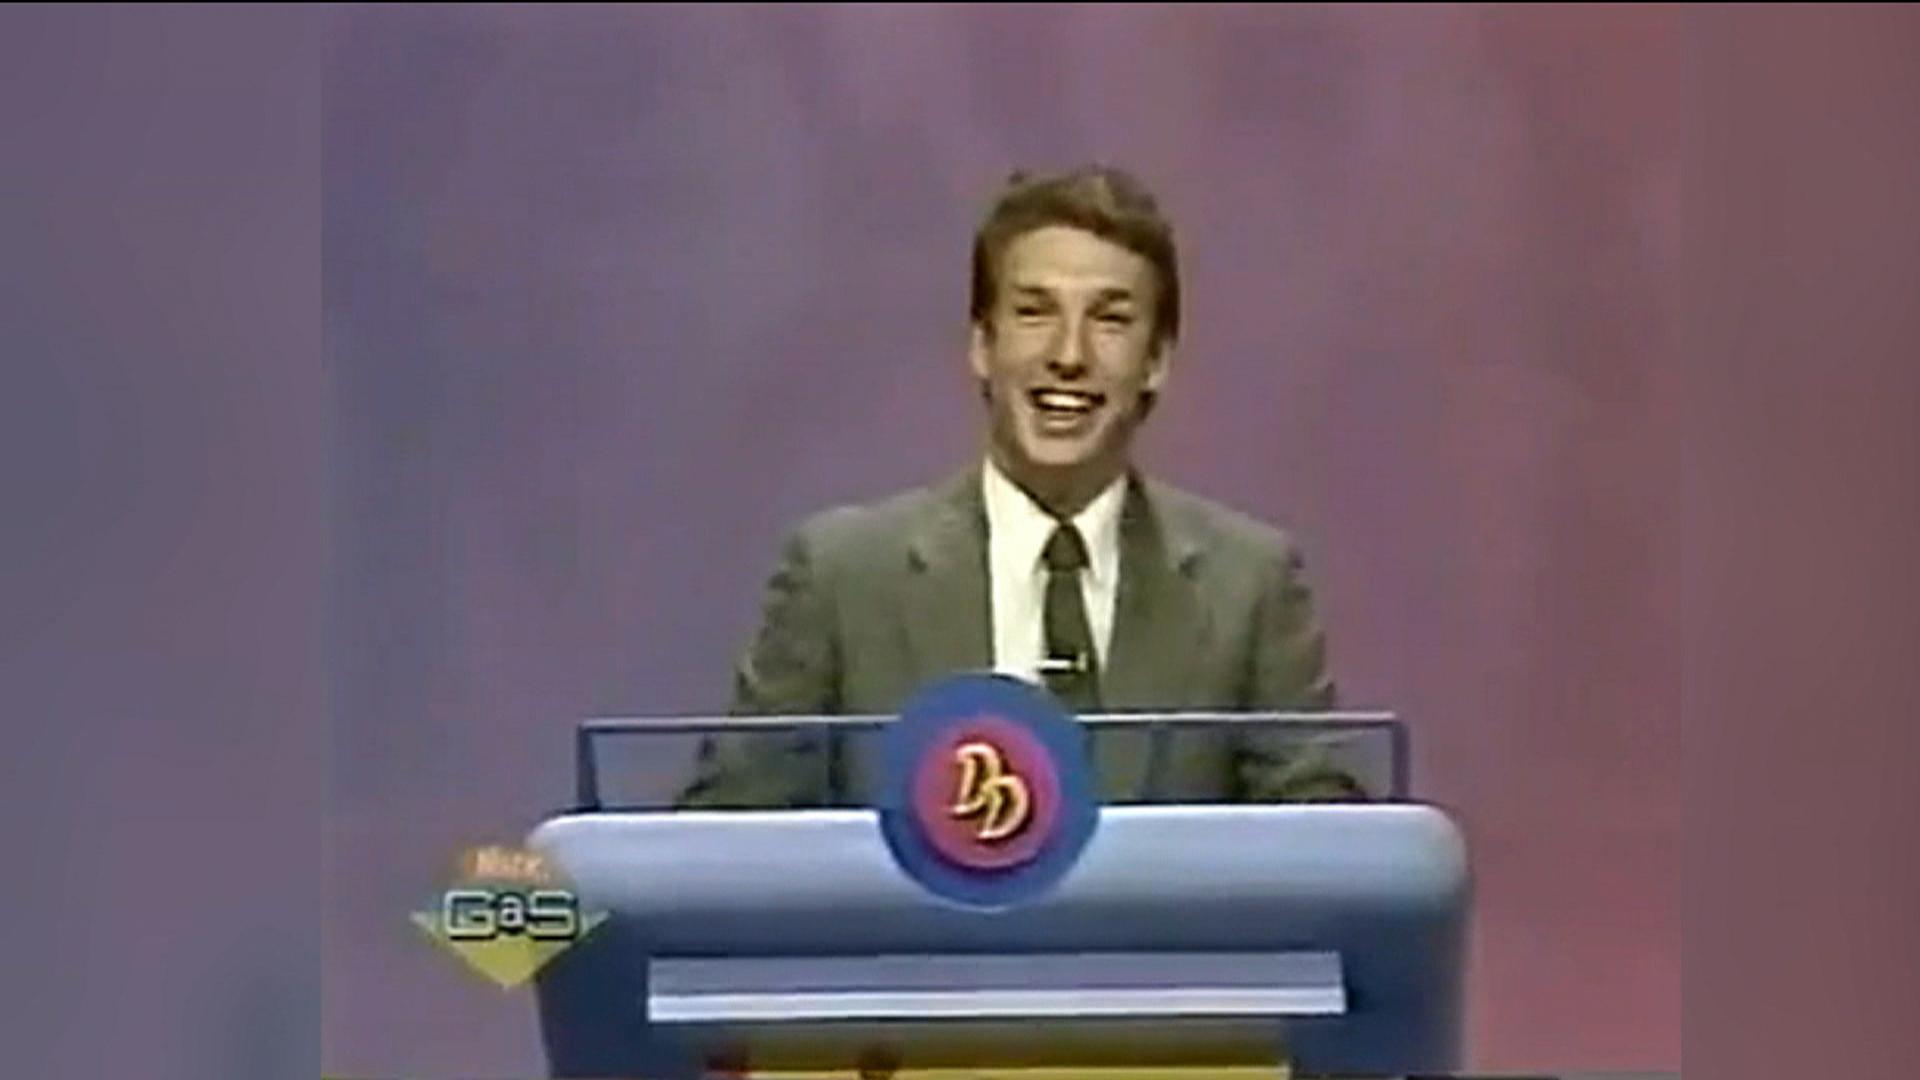 Happy Birthday to Marc Summers, who turns 63 today! 